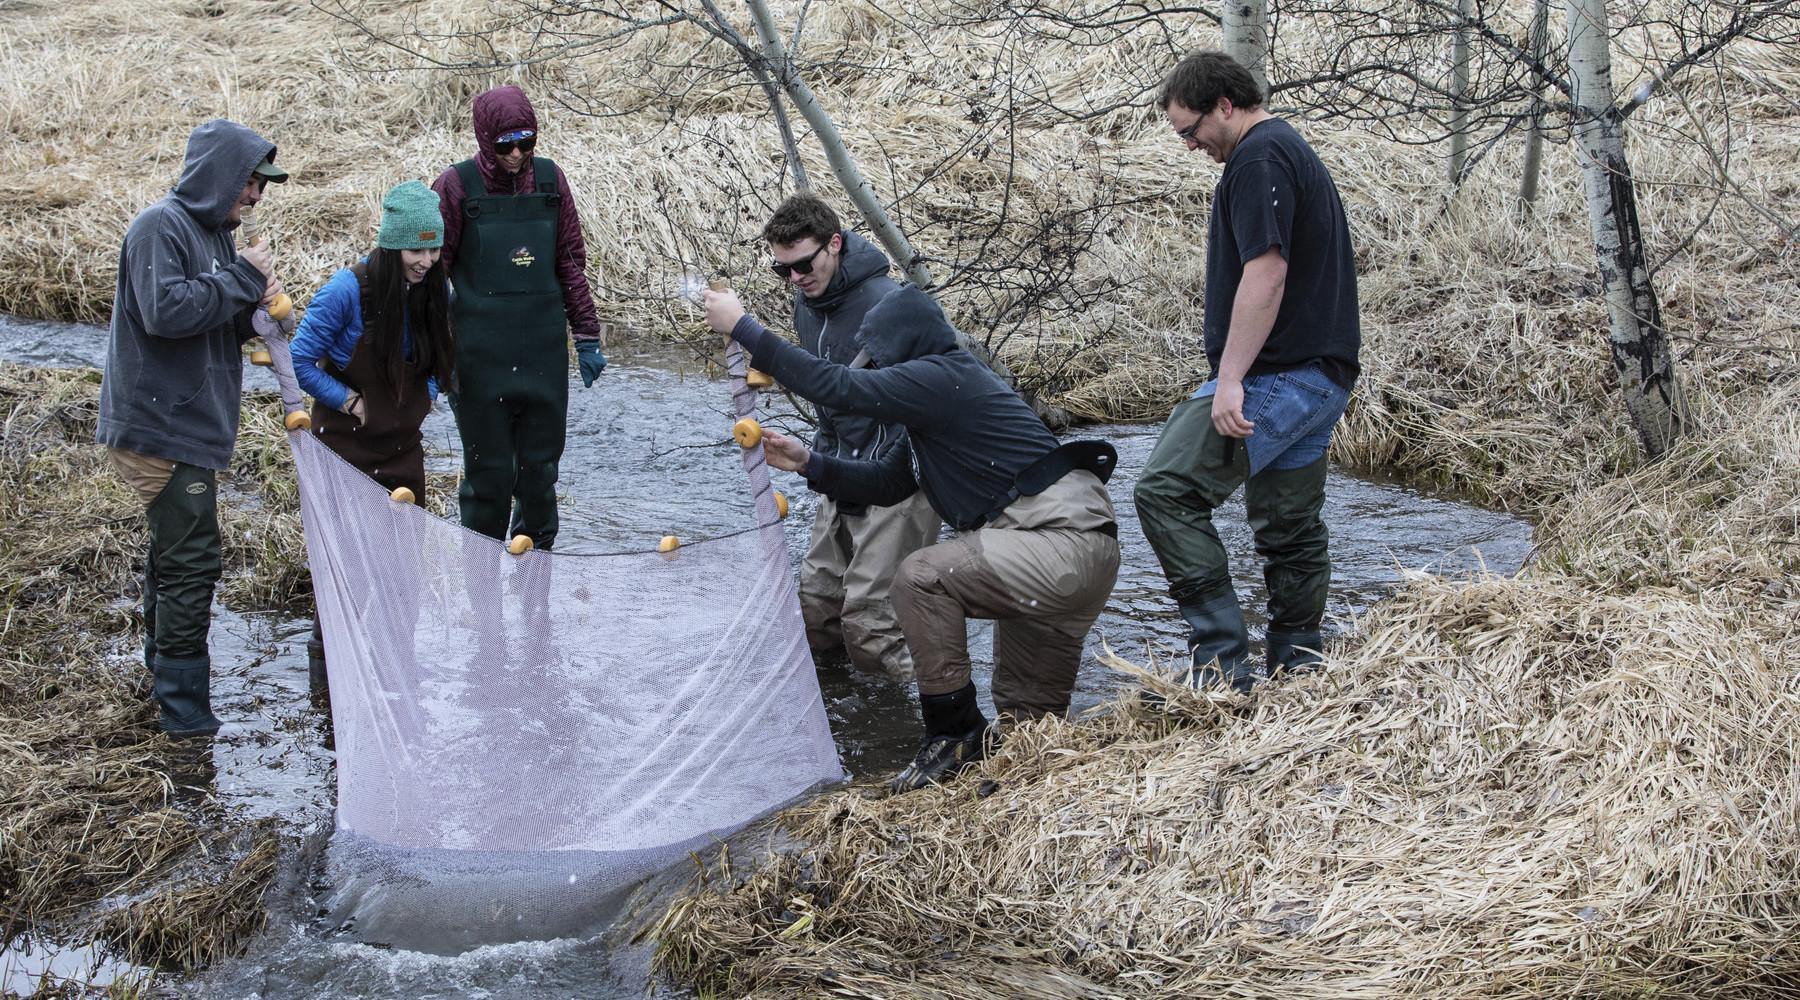 Students and Faculty managing a net at a stream